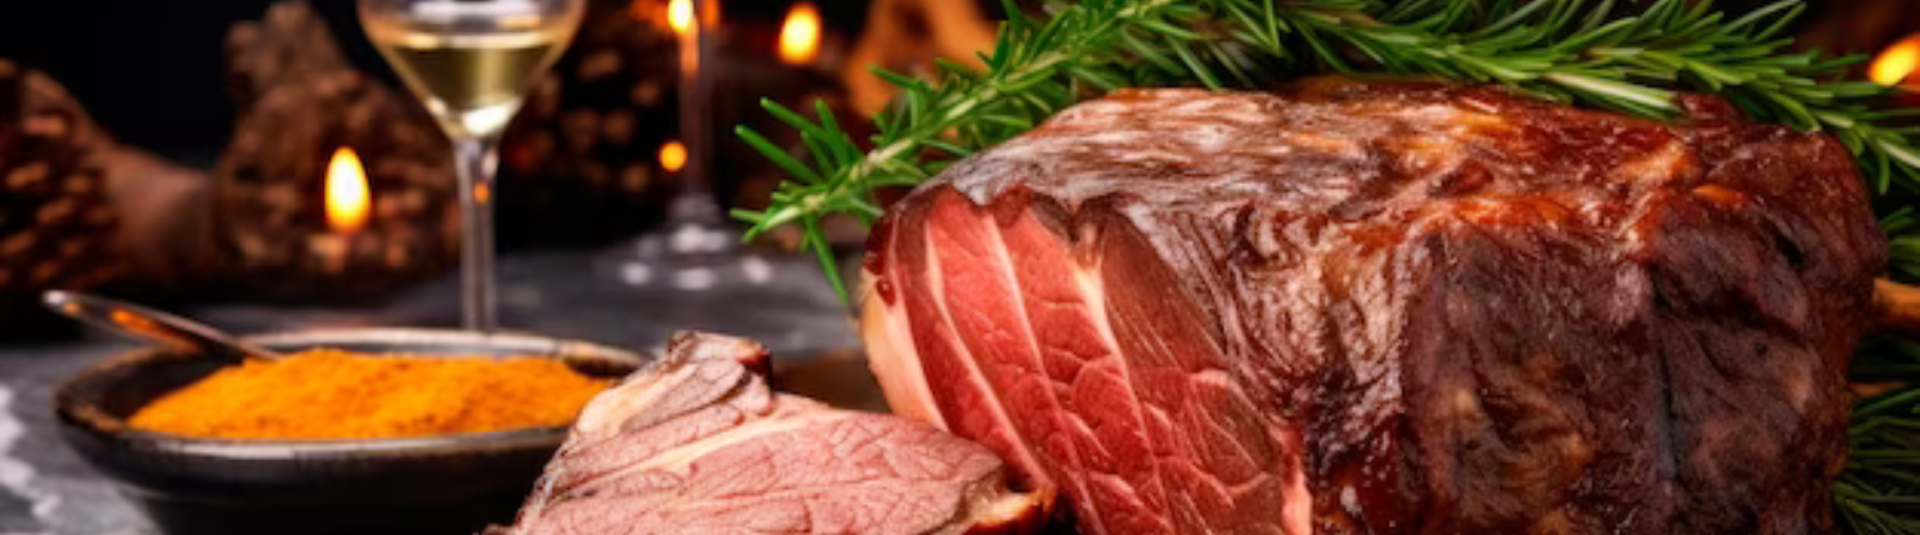 The Ultimate Christmas Meat Roasting Guide for London Butchers and Catering Companies